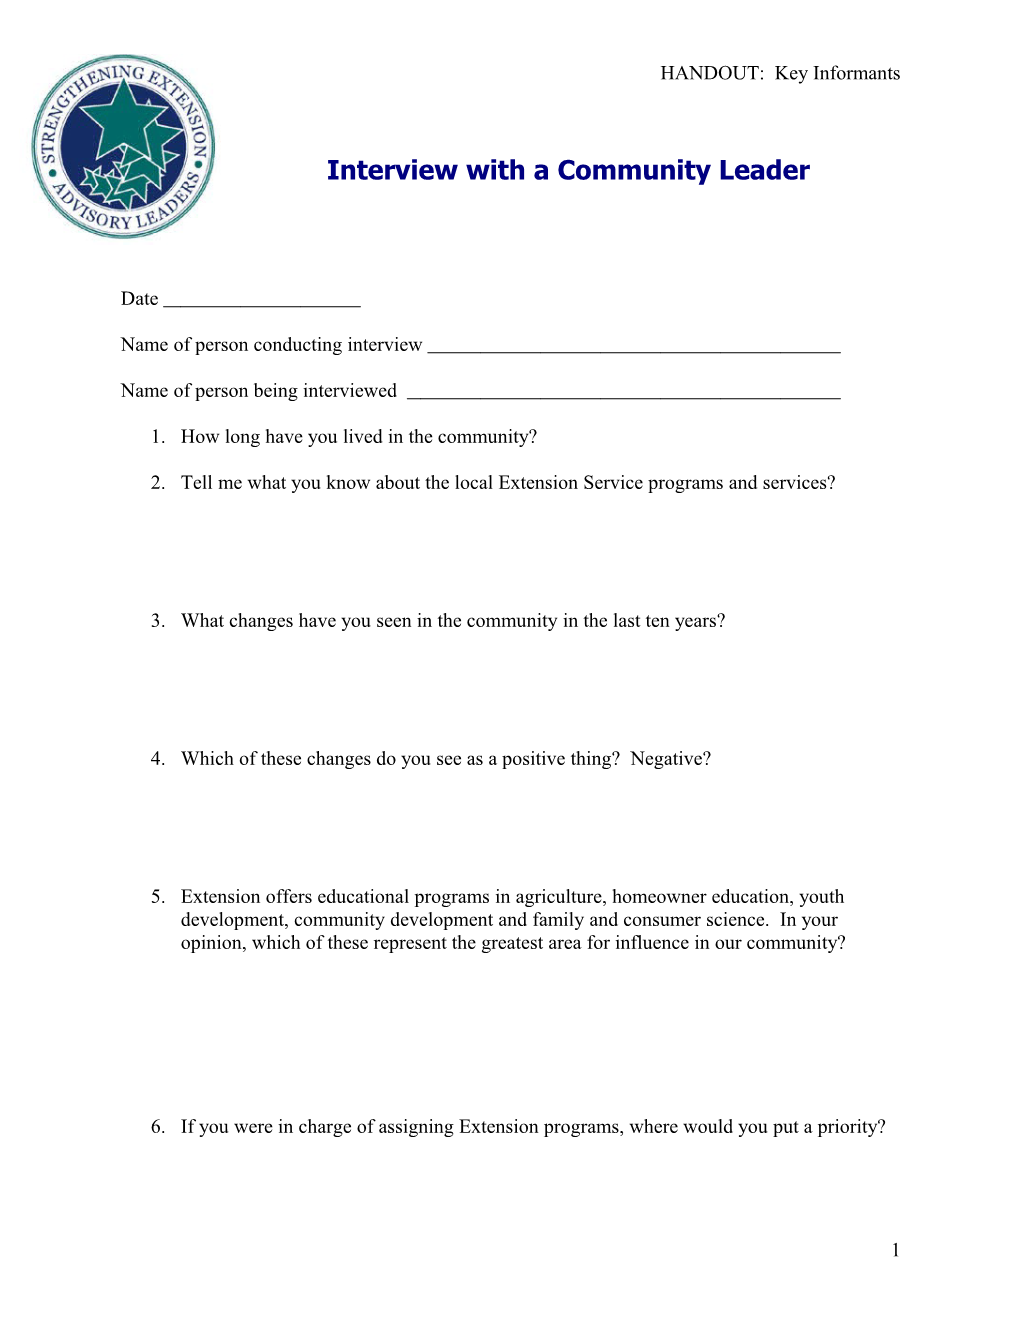 Interview with a Community Leader